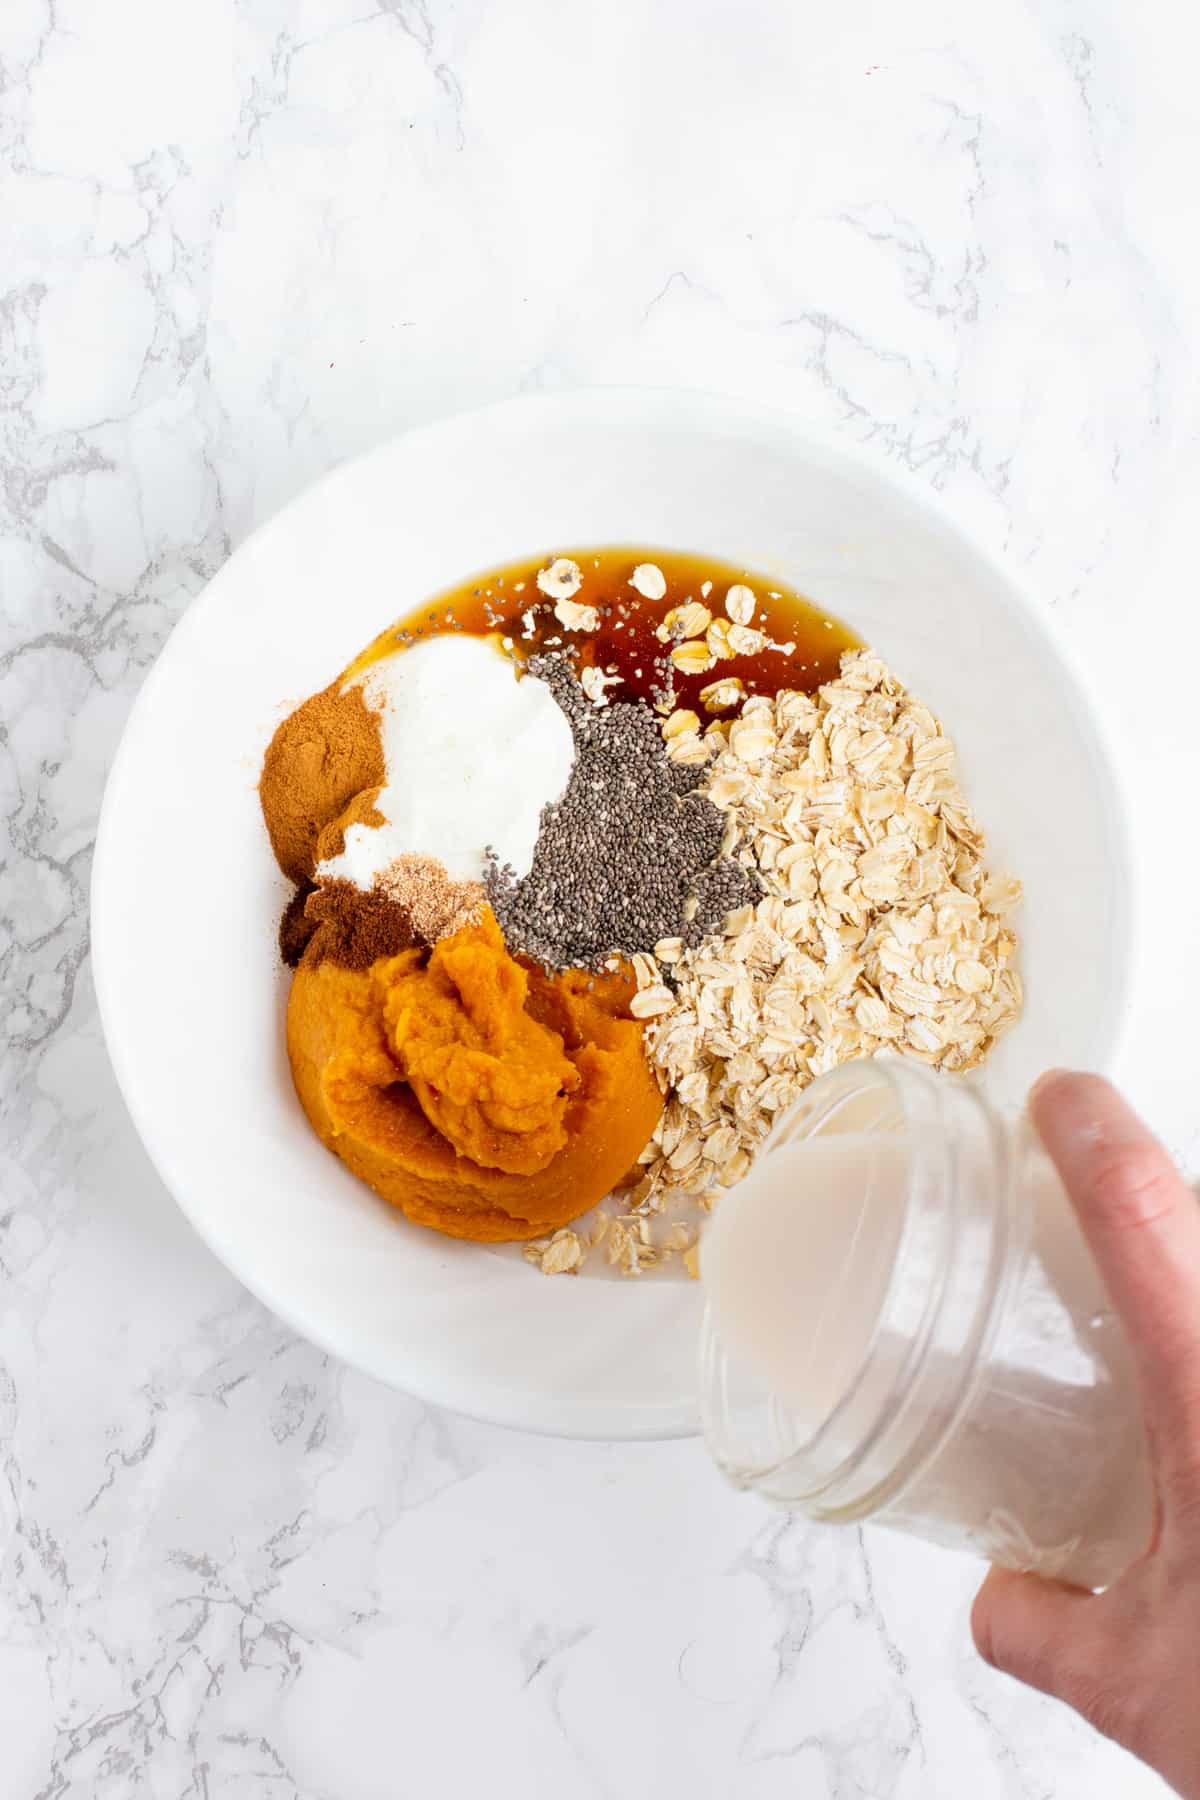 A hand pours milk from a glass jar into a white bowl. The white bowl is filled with other ingredients, including yogurt, pumpkin puree, maple syrup, chia seeds, and rolled oats.